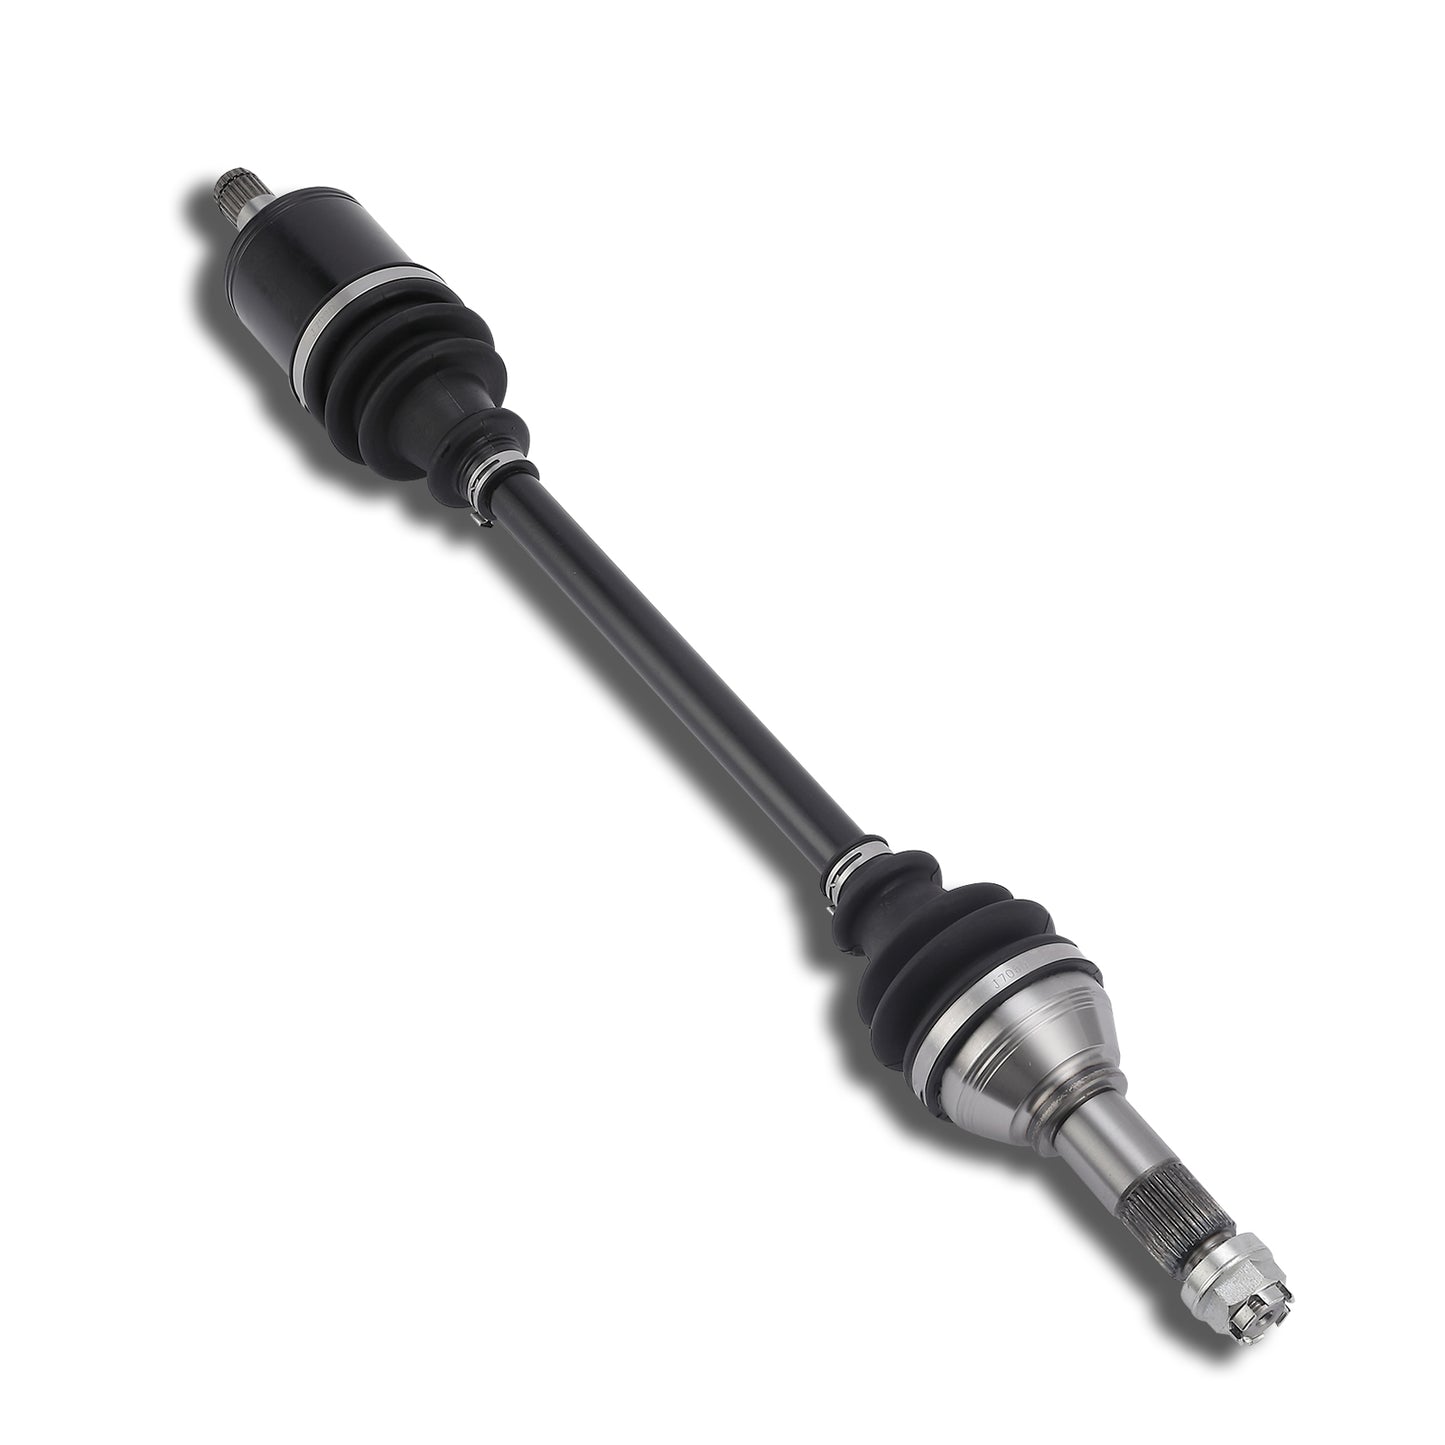 CAM-CA234 Front Right Drive Shaft CV Axle Compatible with CAN AM 2019 2020 2021 Maverick Sport 1000 RF 705402030